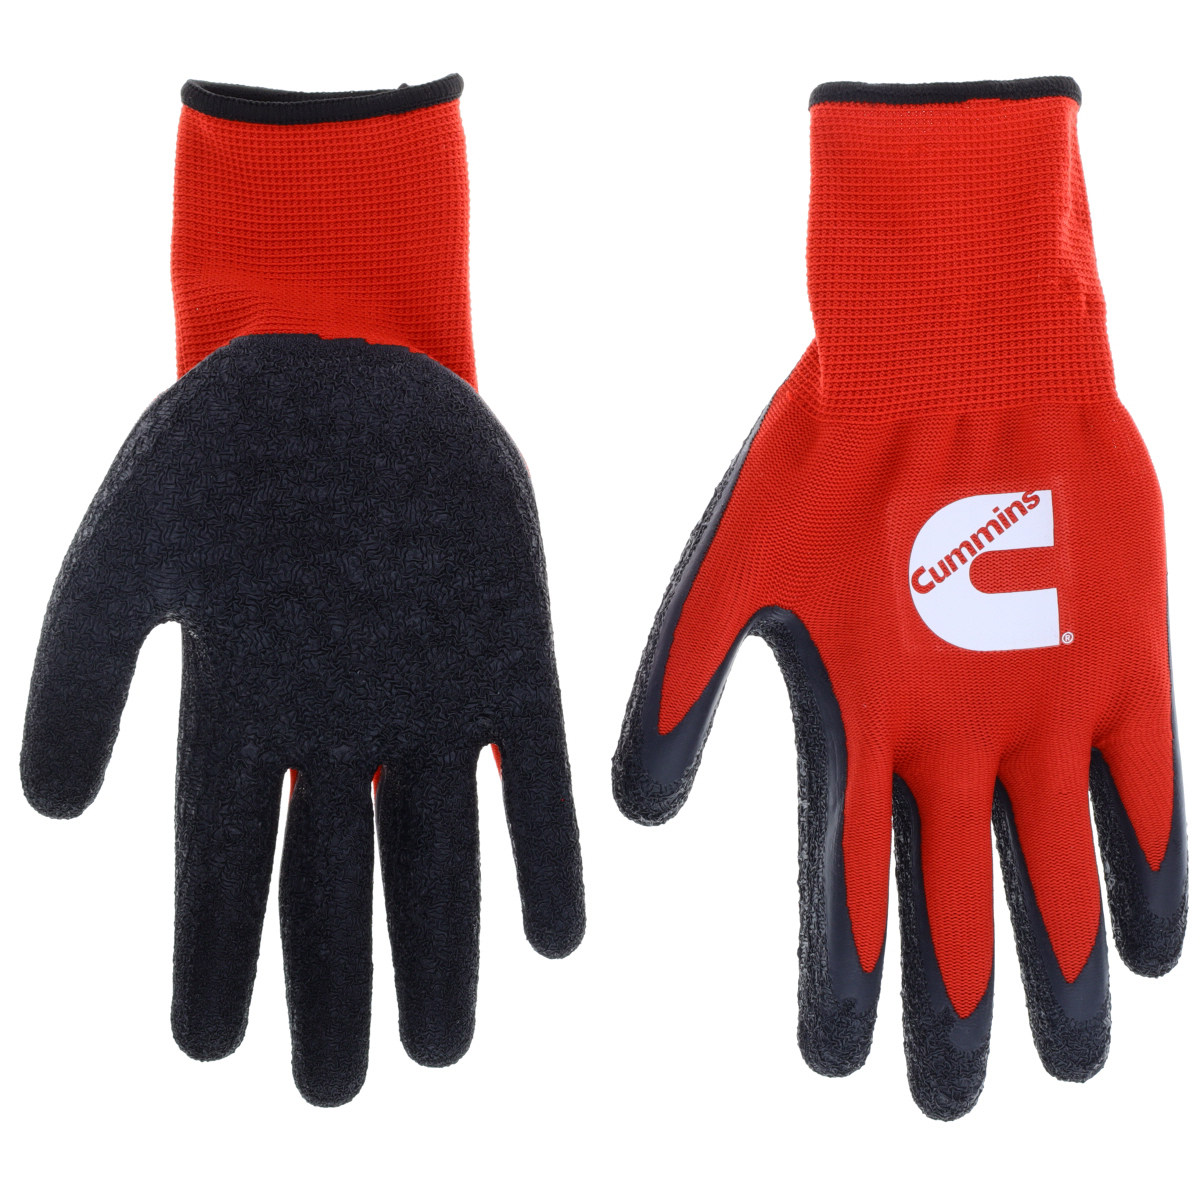 Cummins Red and Black Latex Dipped Palm Gloves CMN35152 - Rubber Latex Coated Textured Work Gloves Gardening PPE All-Purpose Lat